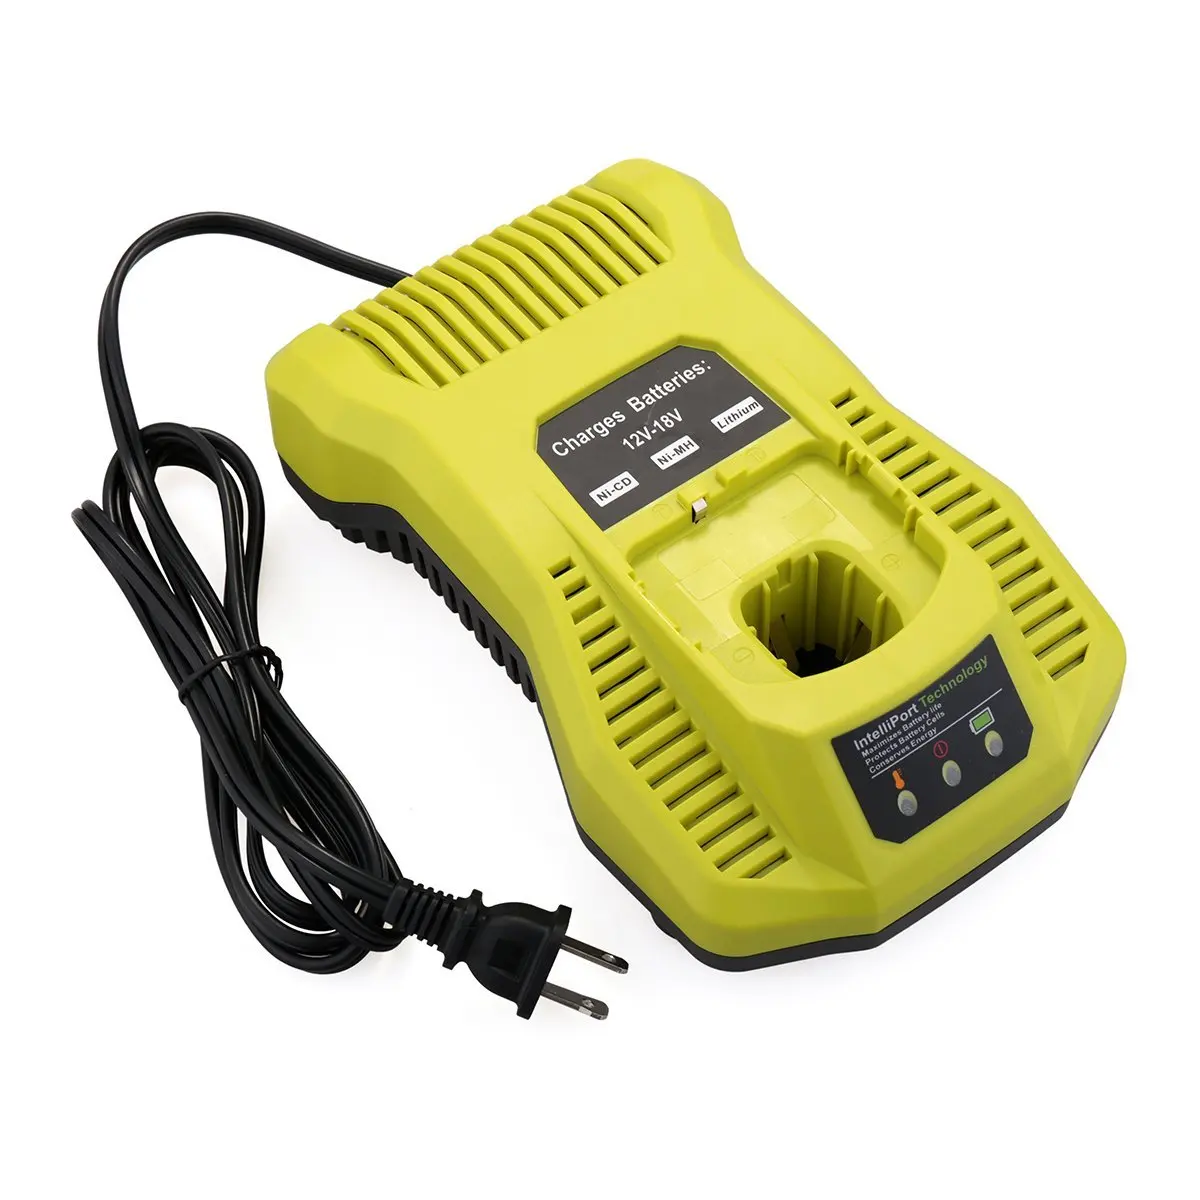 18V IntelliPort Battery Charger for sale online Ryobi P118 Lithium-ion/Ni-Cad ONE 